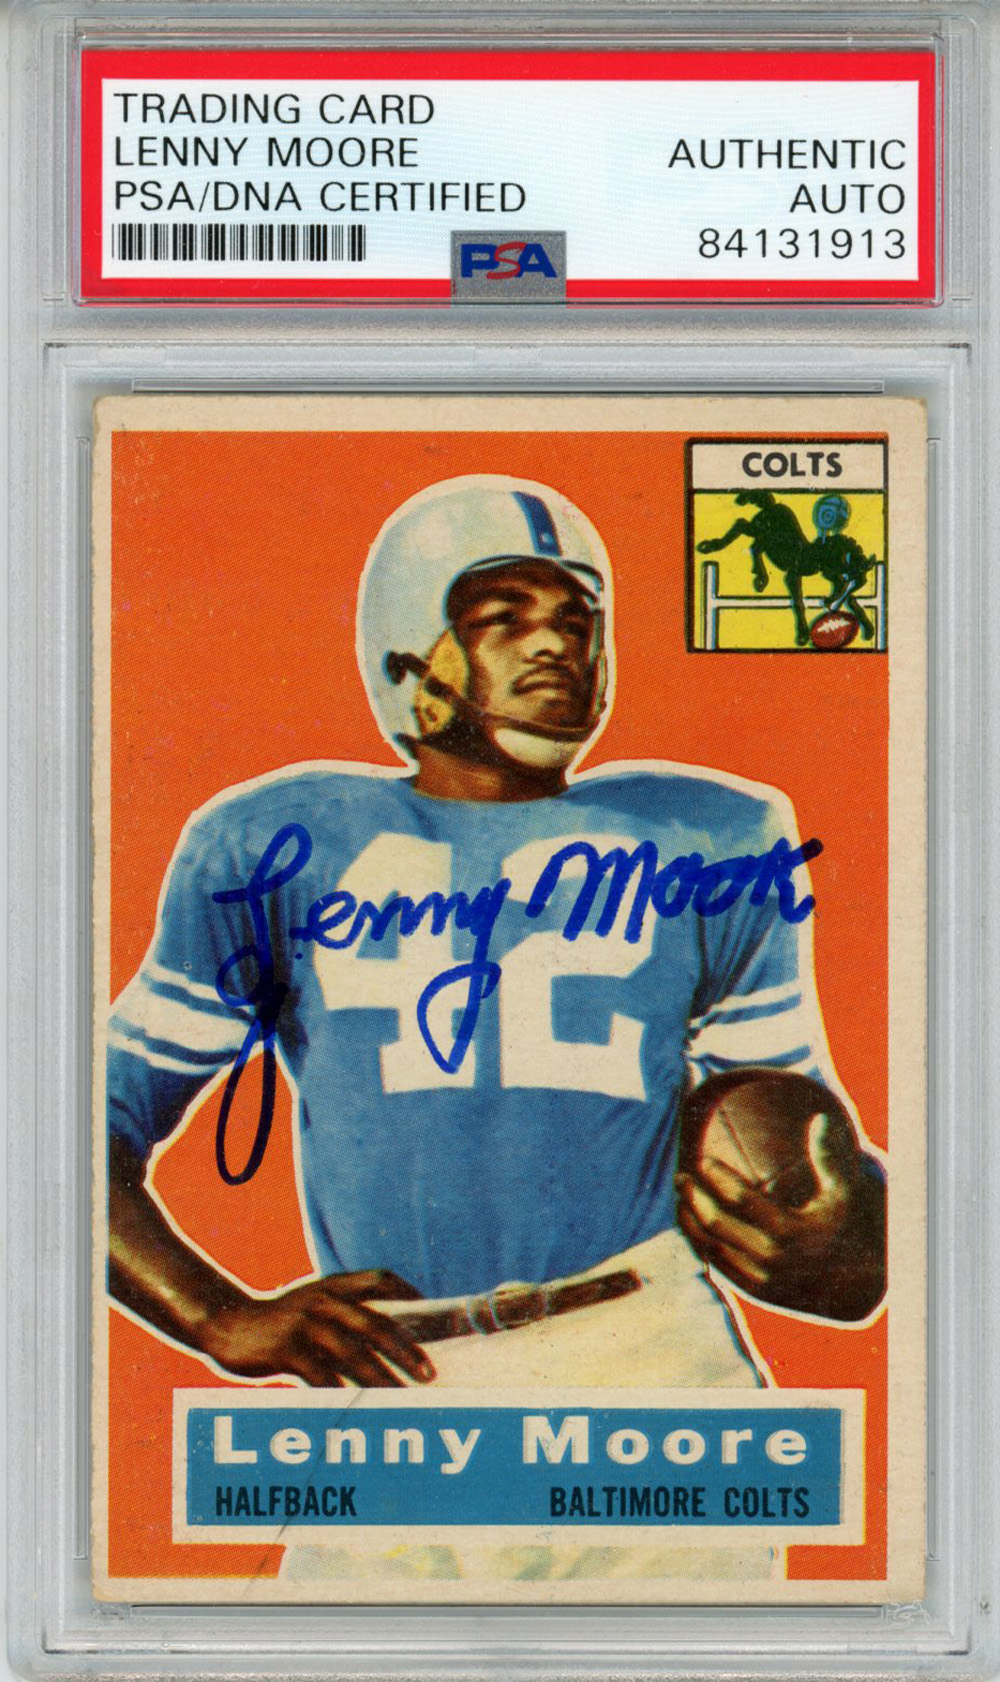 Lenny Moore Autographed 1956 Topps #60 Trading Card PSA Slab